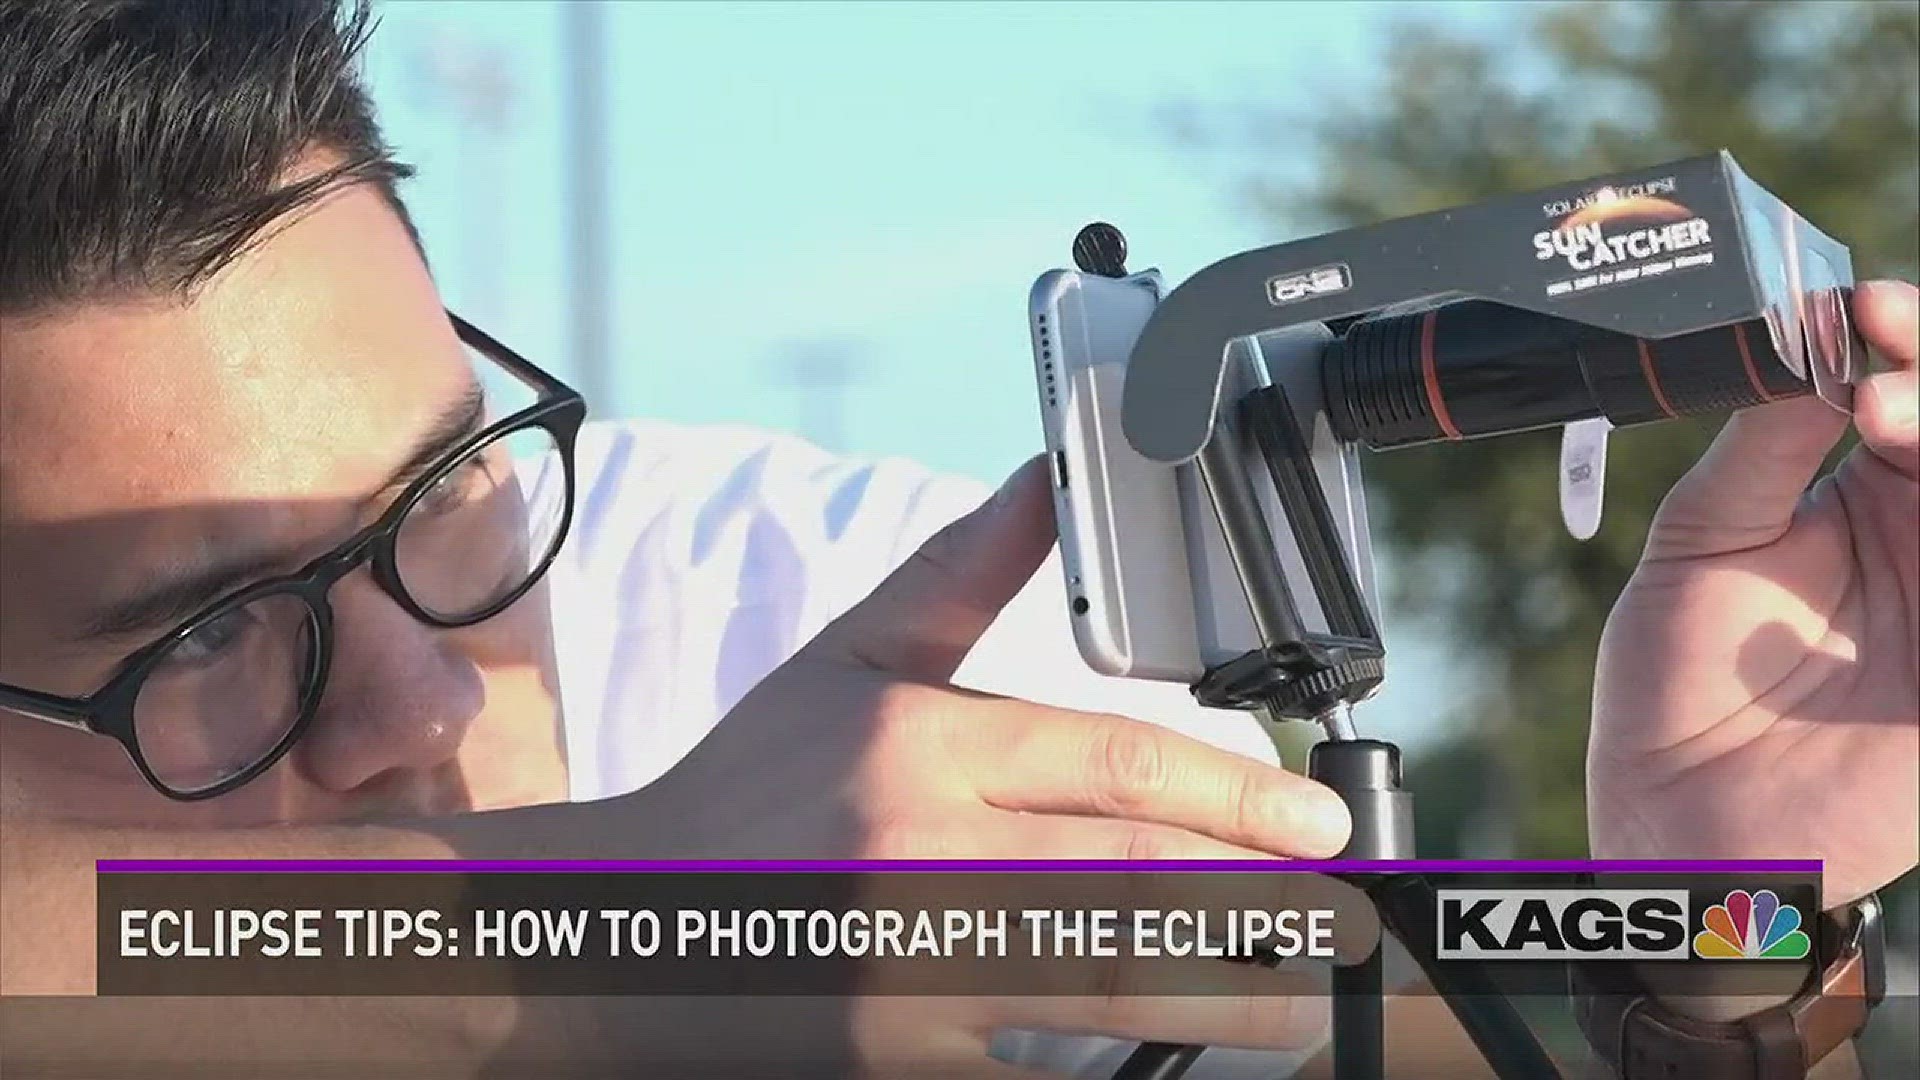 Tips for taking photos during the eclipse.